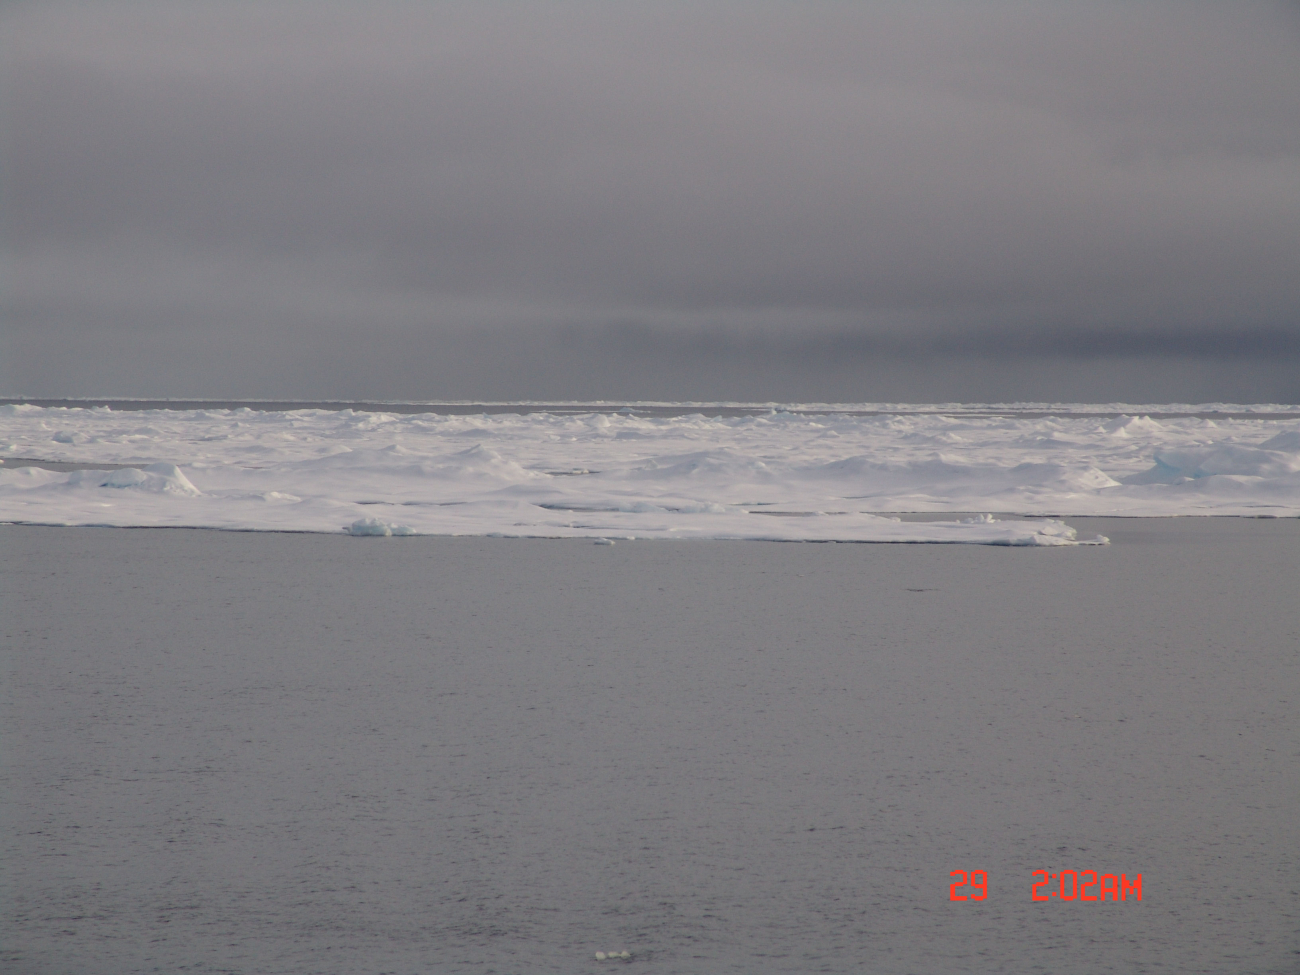 In open water looking towards multi-year ice floes